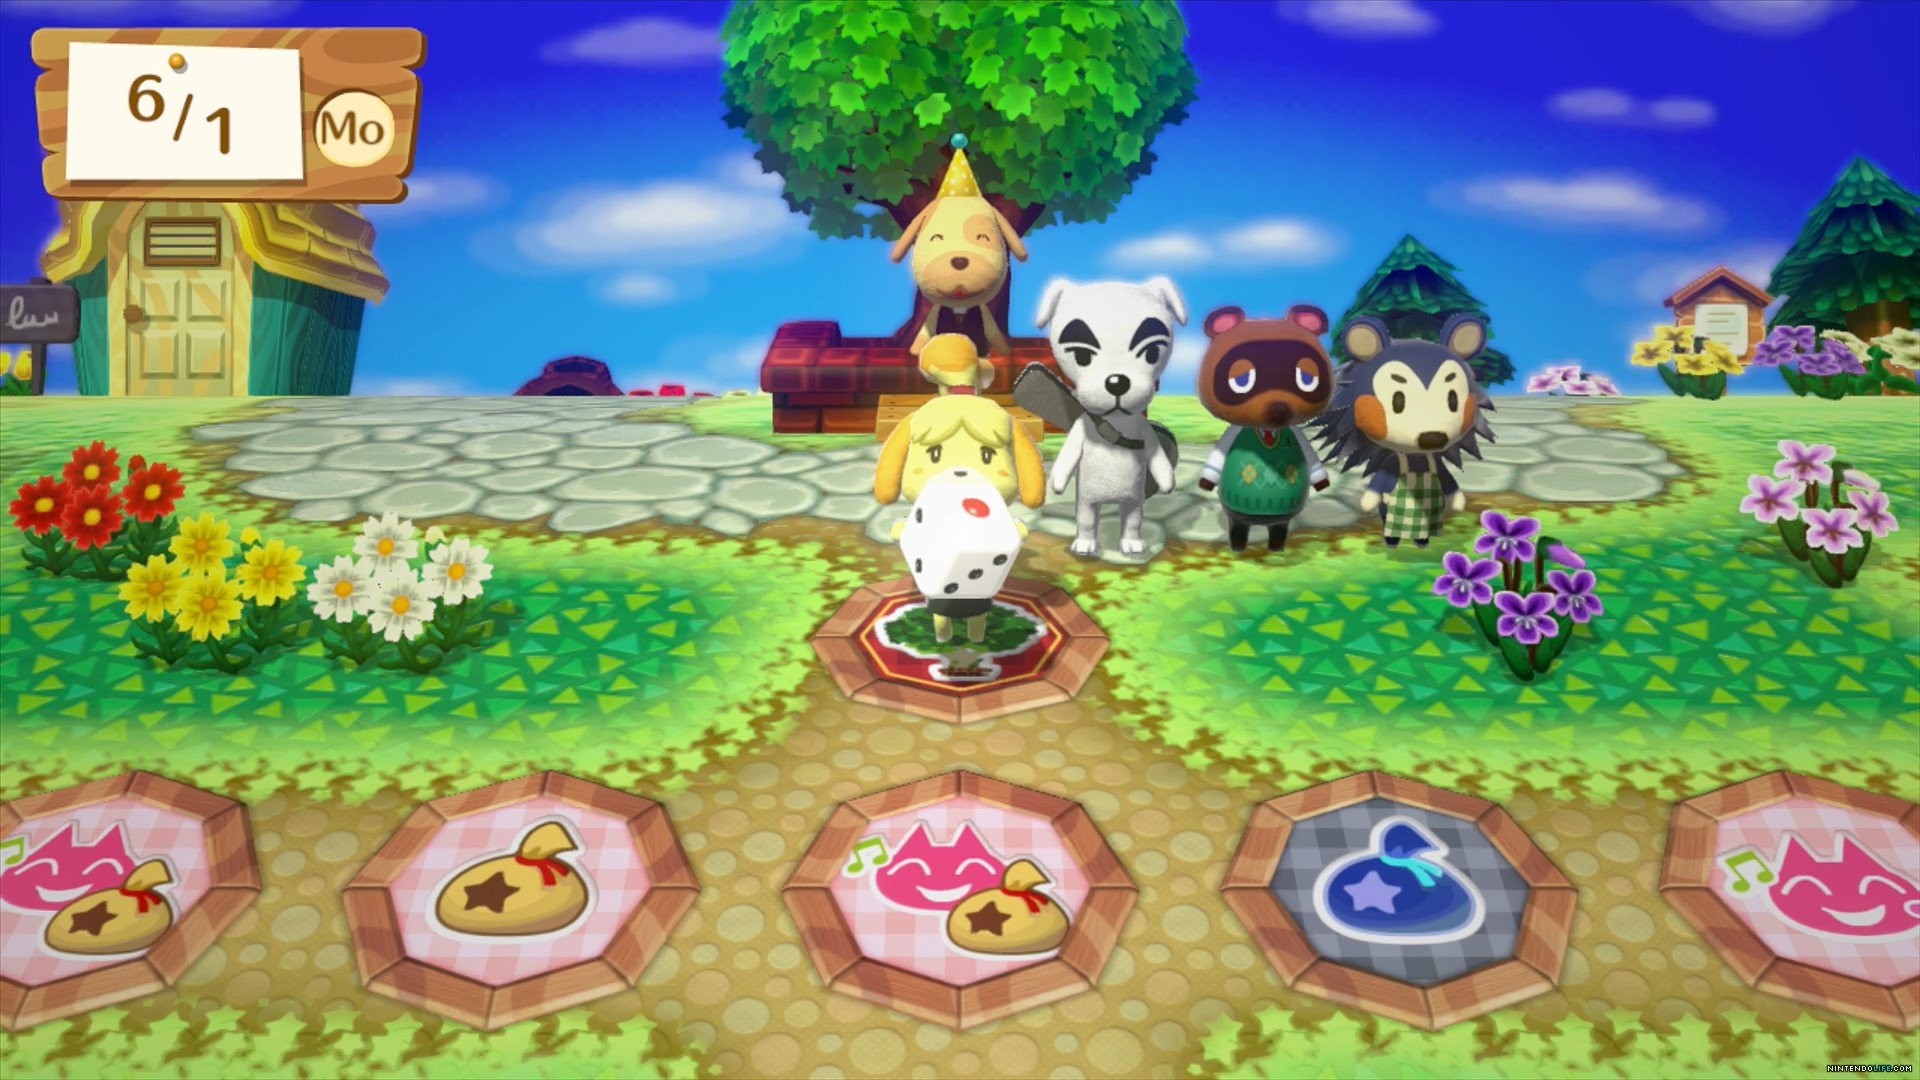 1920x1080 This Festival is played in a classic Animal Crossing town with a  traditional board game look. The town looks great on Wii U and shows us how  a true Animal ...